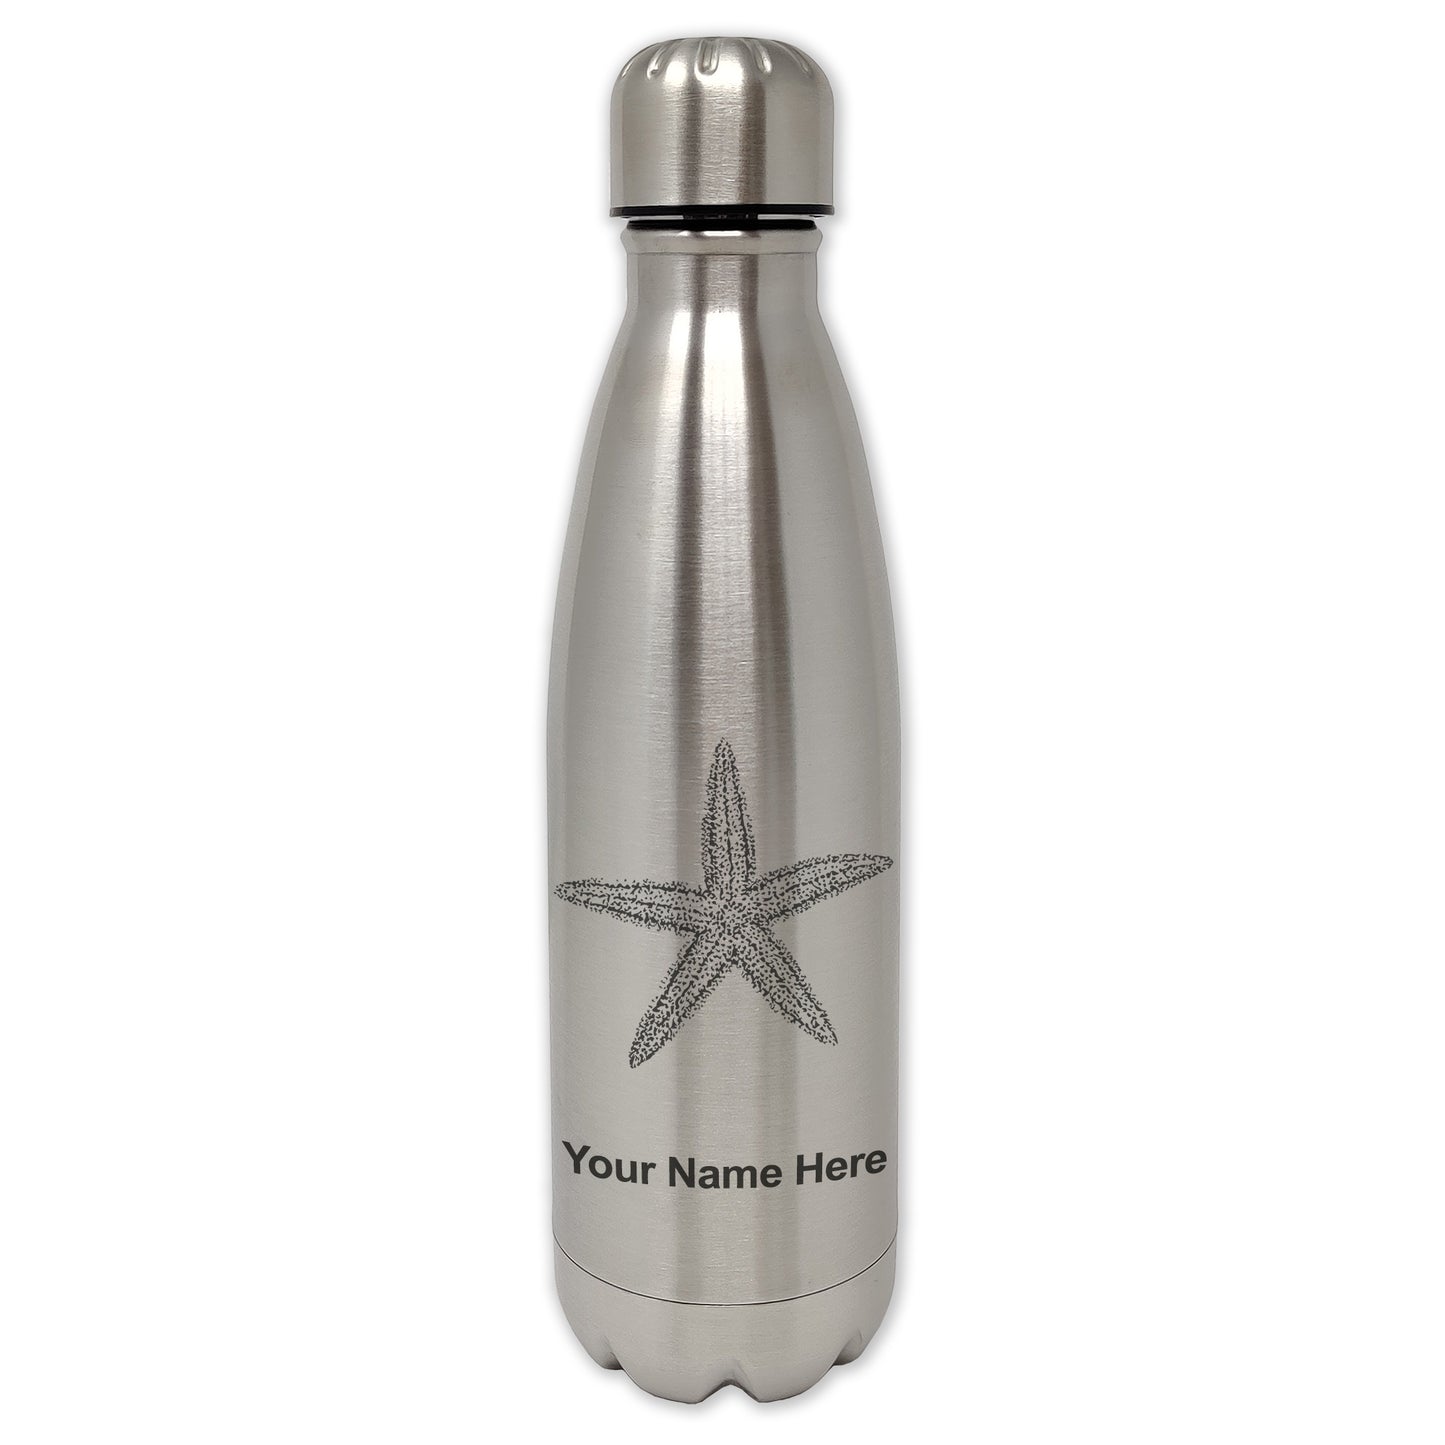 LaserGram Single Wall Water Bottle, Starfish, Personalized Engraving Included